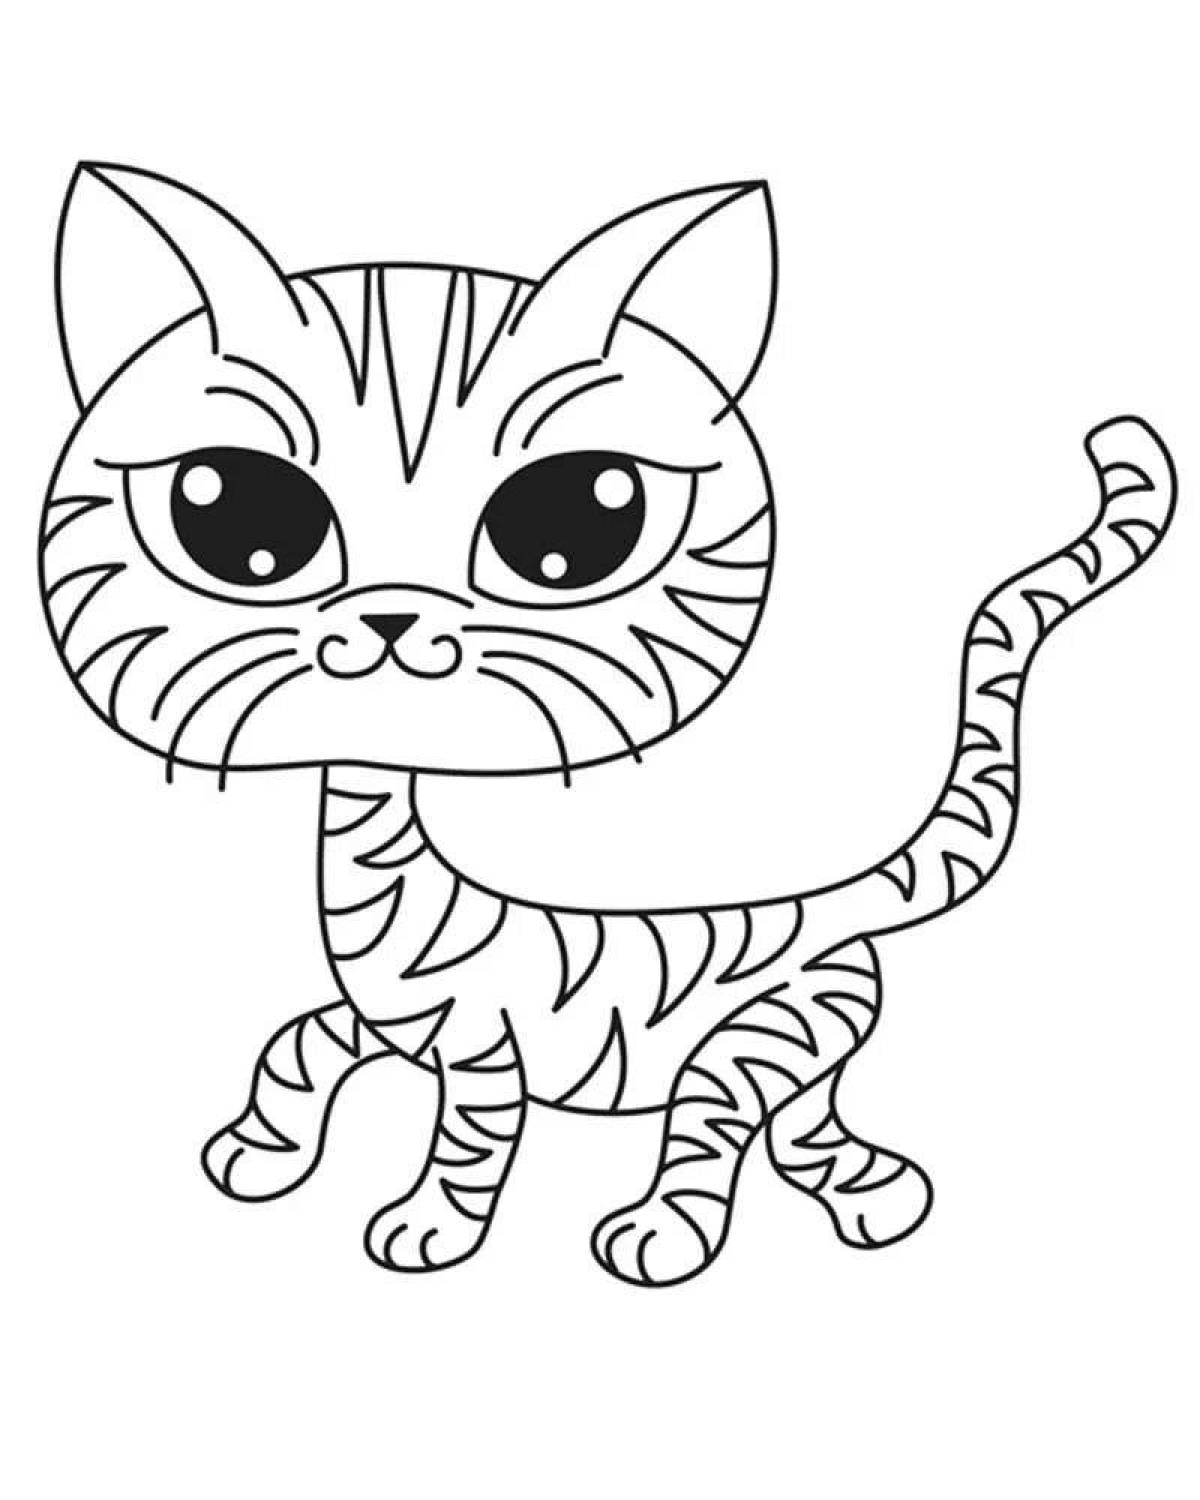 Cute kitty coloring book for kids